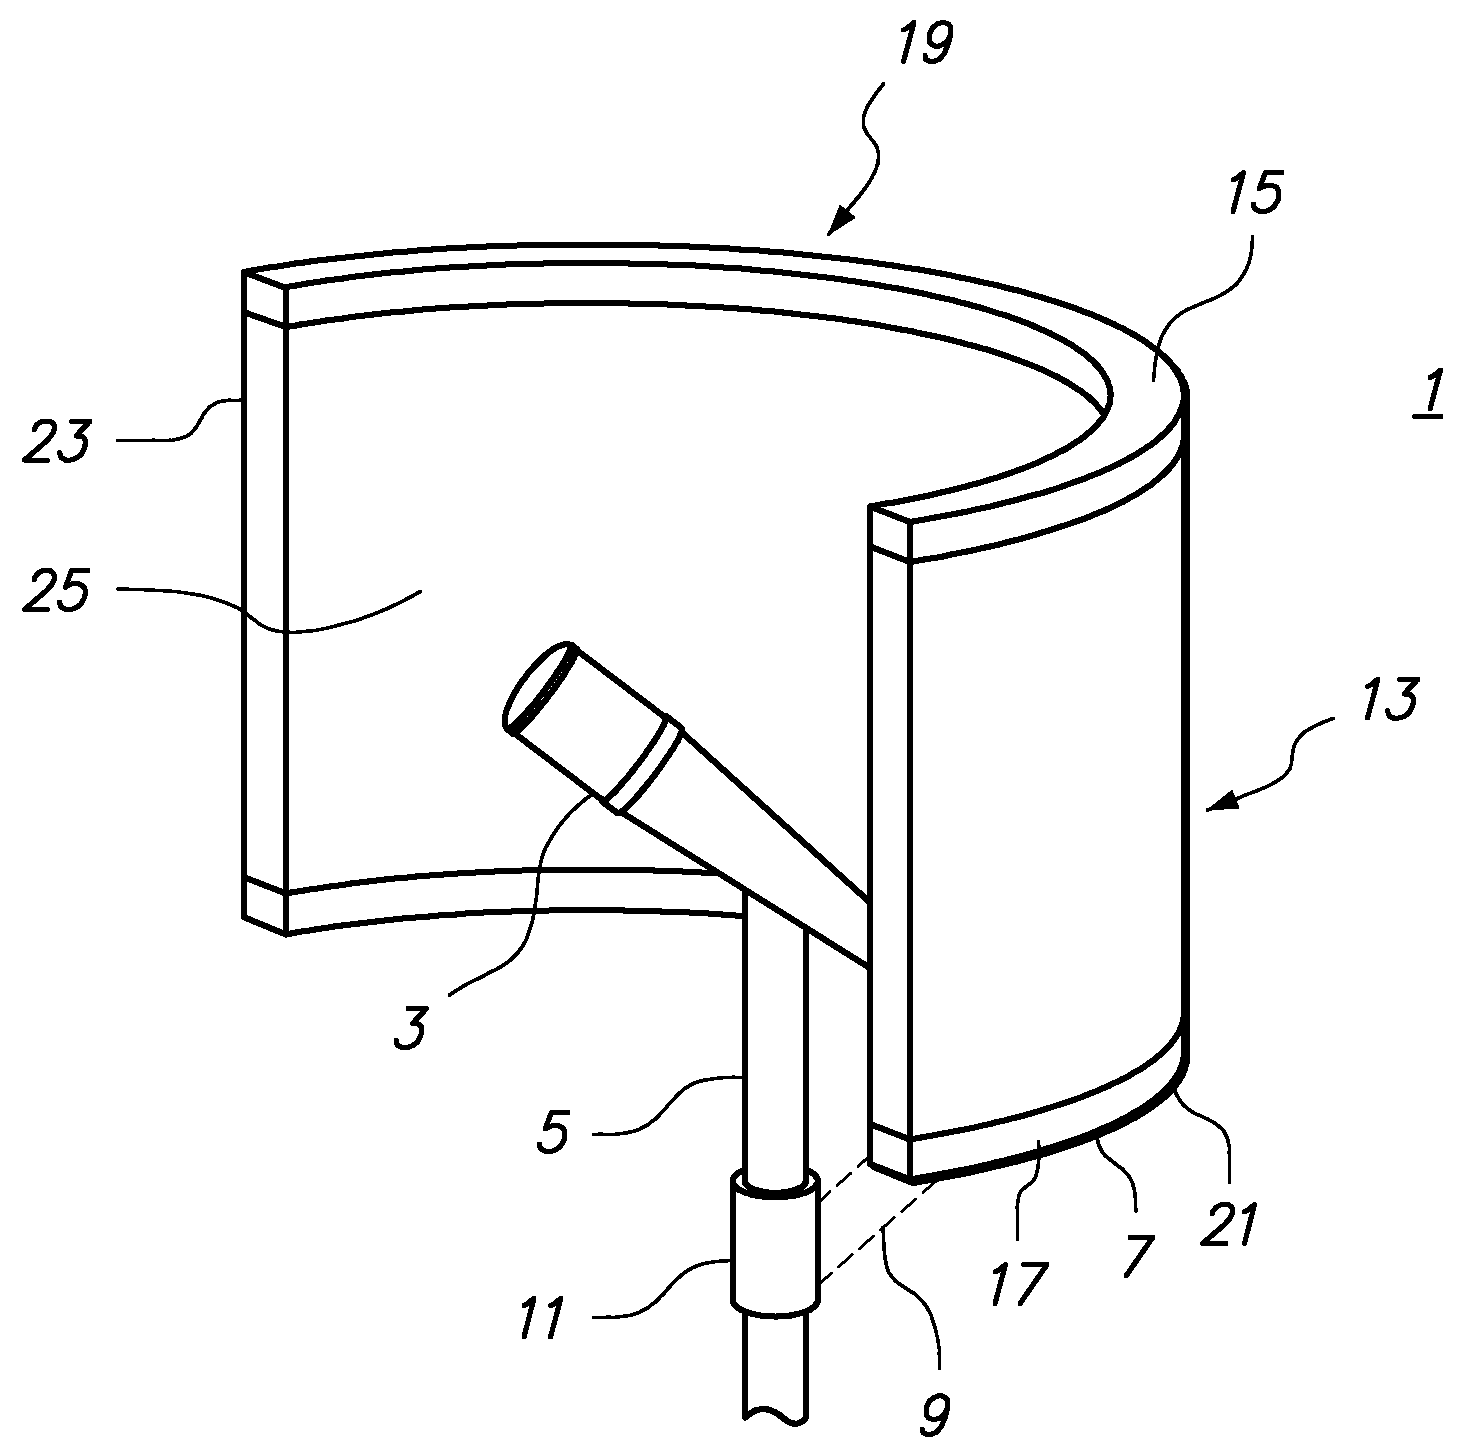 Apparatus for Absorbing Acoustical Energy and Use Thereof